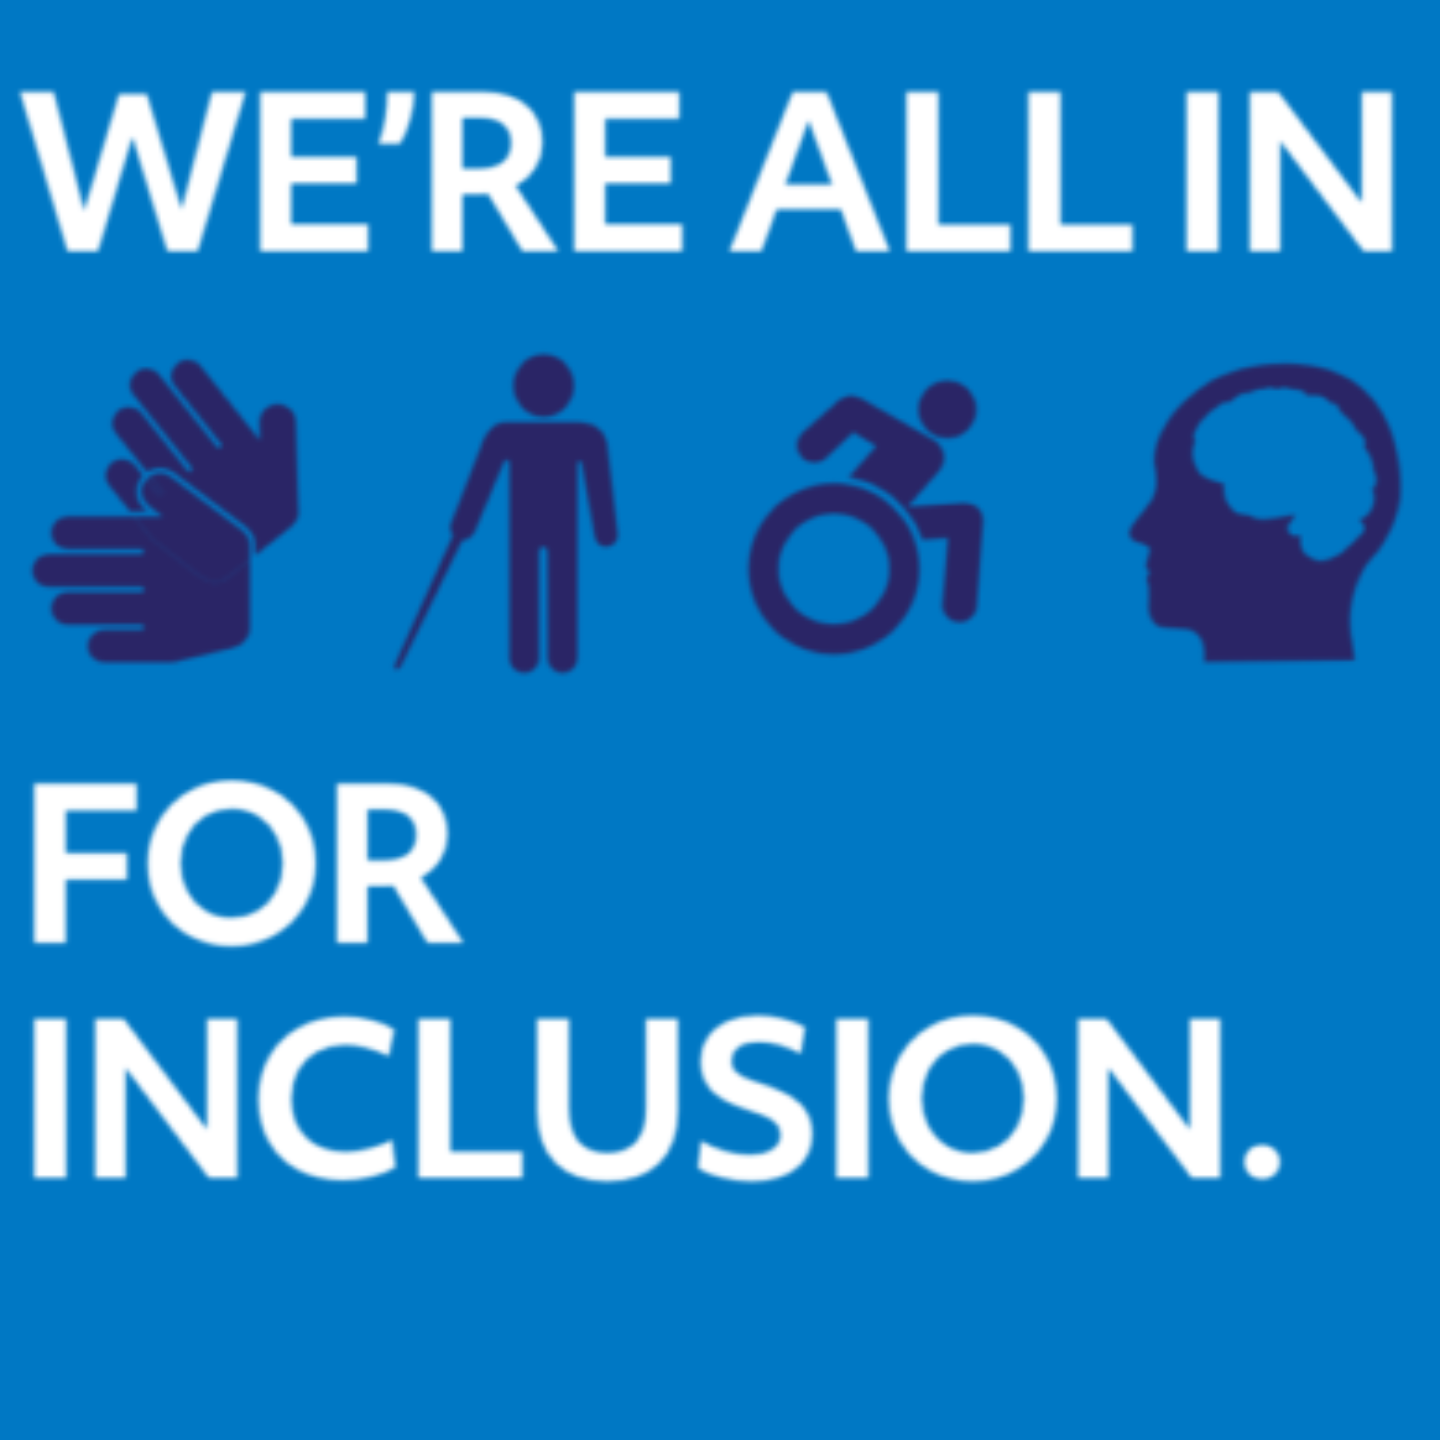 We're all IN for Inclusion